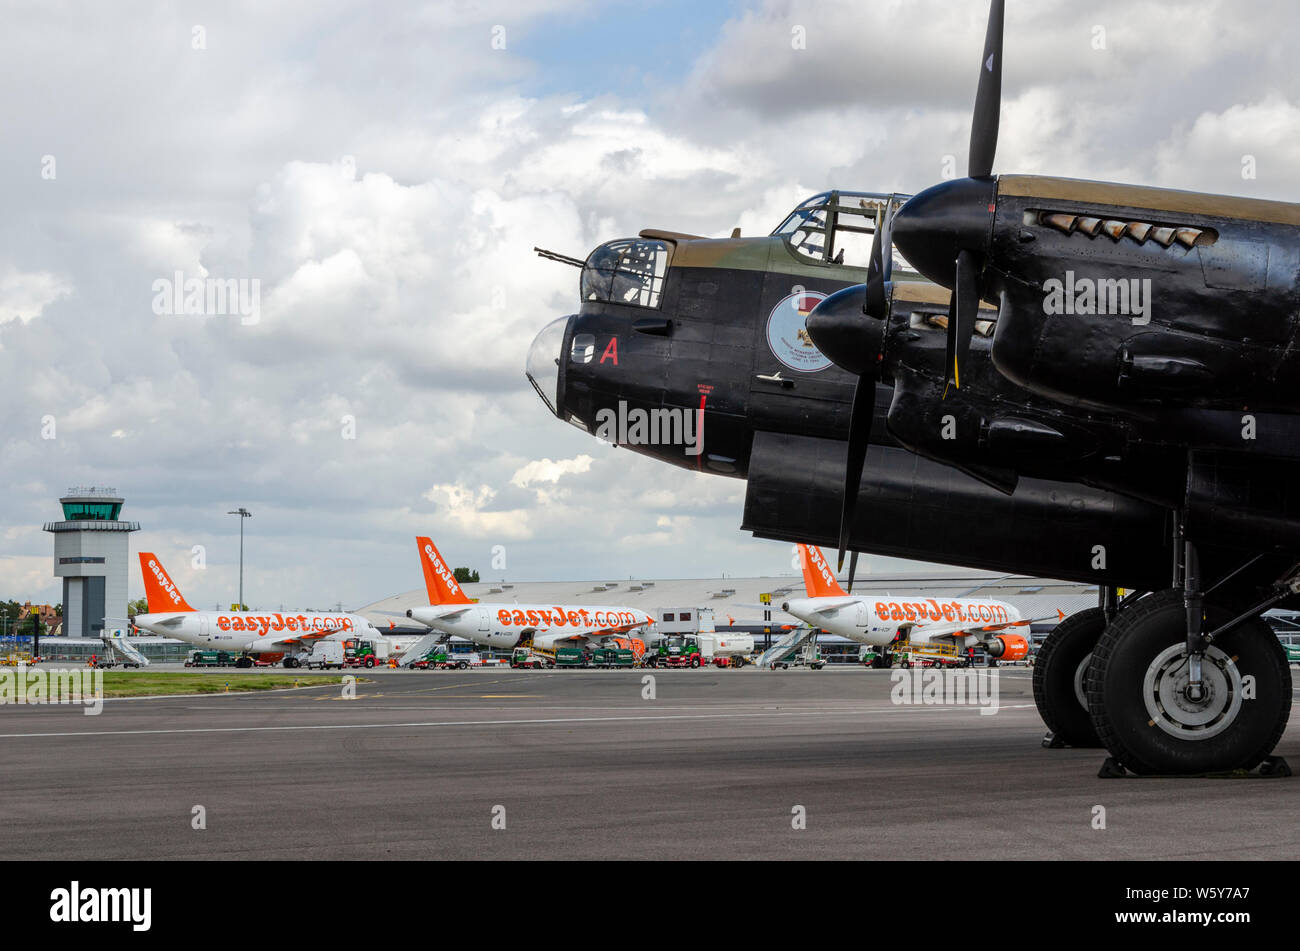 Canadian Warplane Heritage Museum Avro Lancaster FM213, known as the Mynarski Lancaster at London Southend Airport with easyJet planes and atc tower Stock Photo